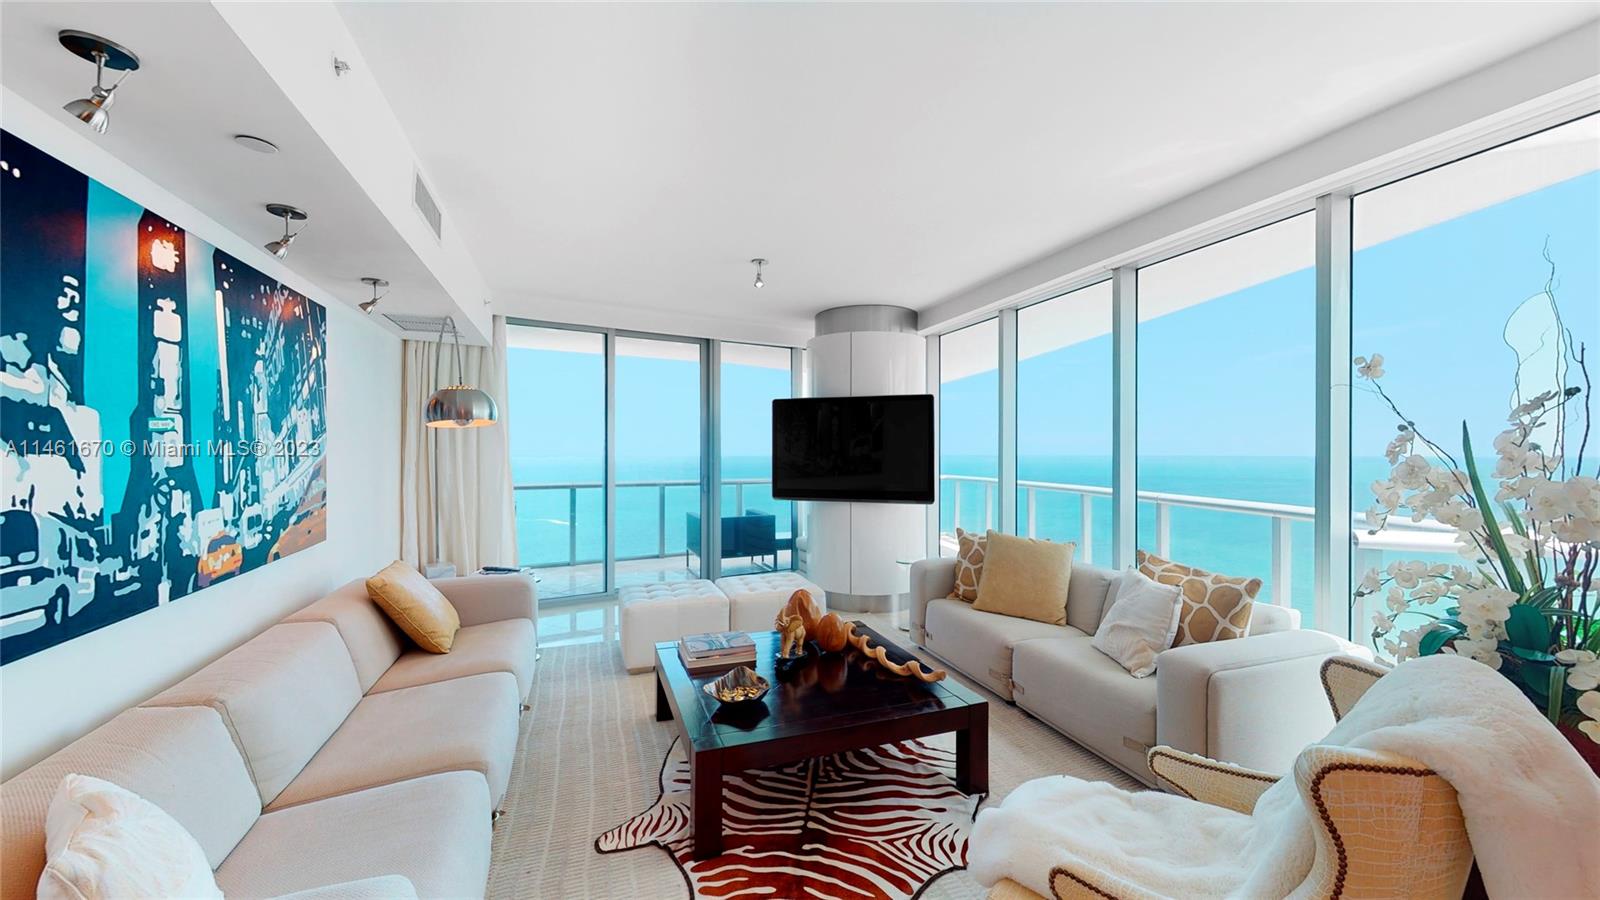 Property for Sale at 17001 Collins Ave 3601, Sunny Isles Beach, Miami-Dade County, Florida - Bedrooms: 4 
Bathrooms: 5  - $3,485,000